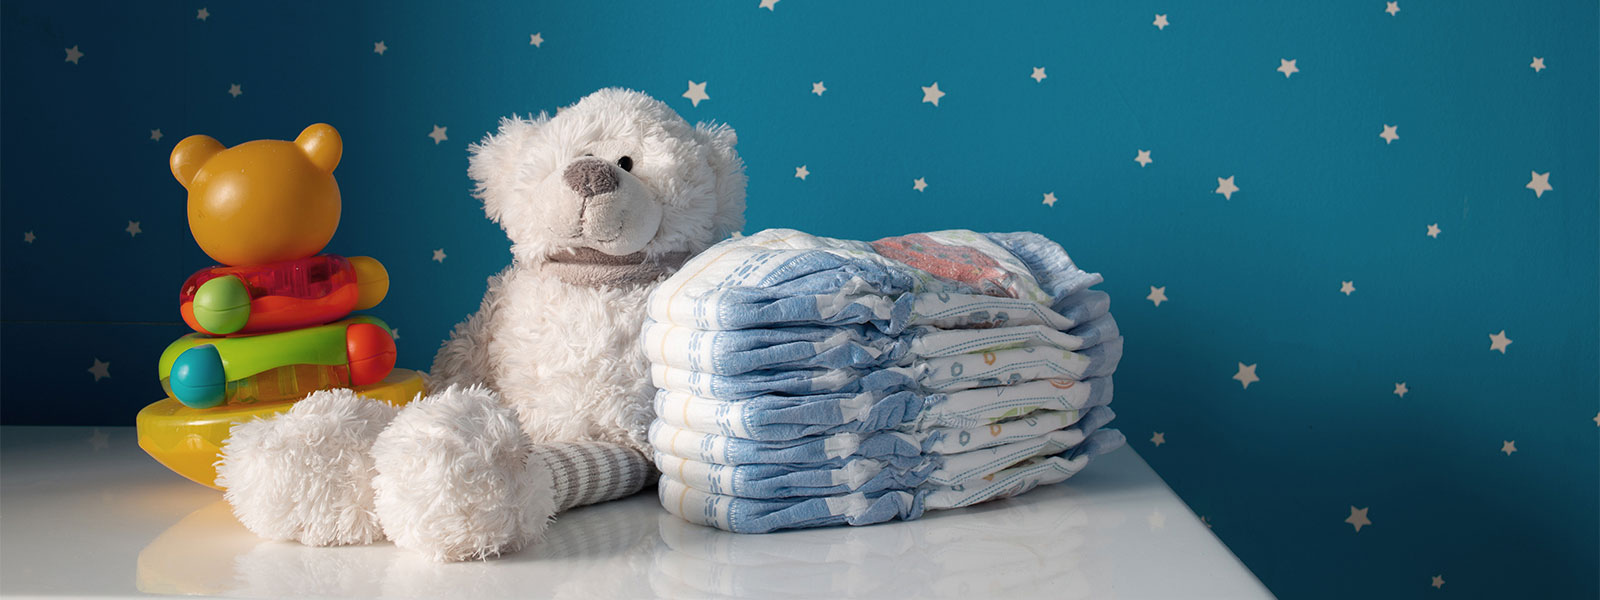 teddy bear and diapers stacked on a dresser